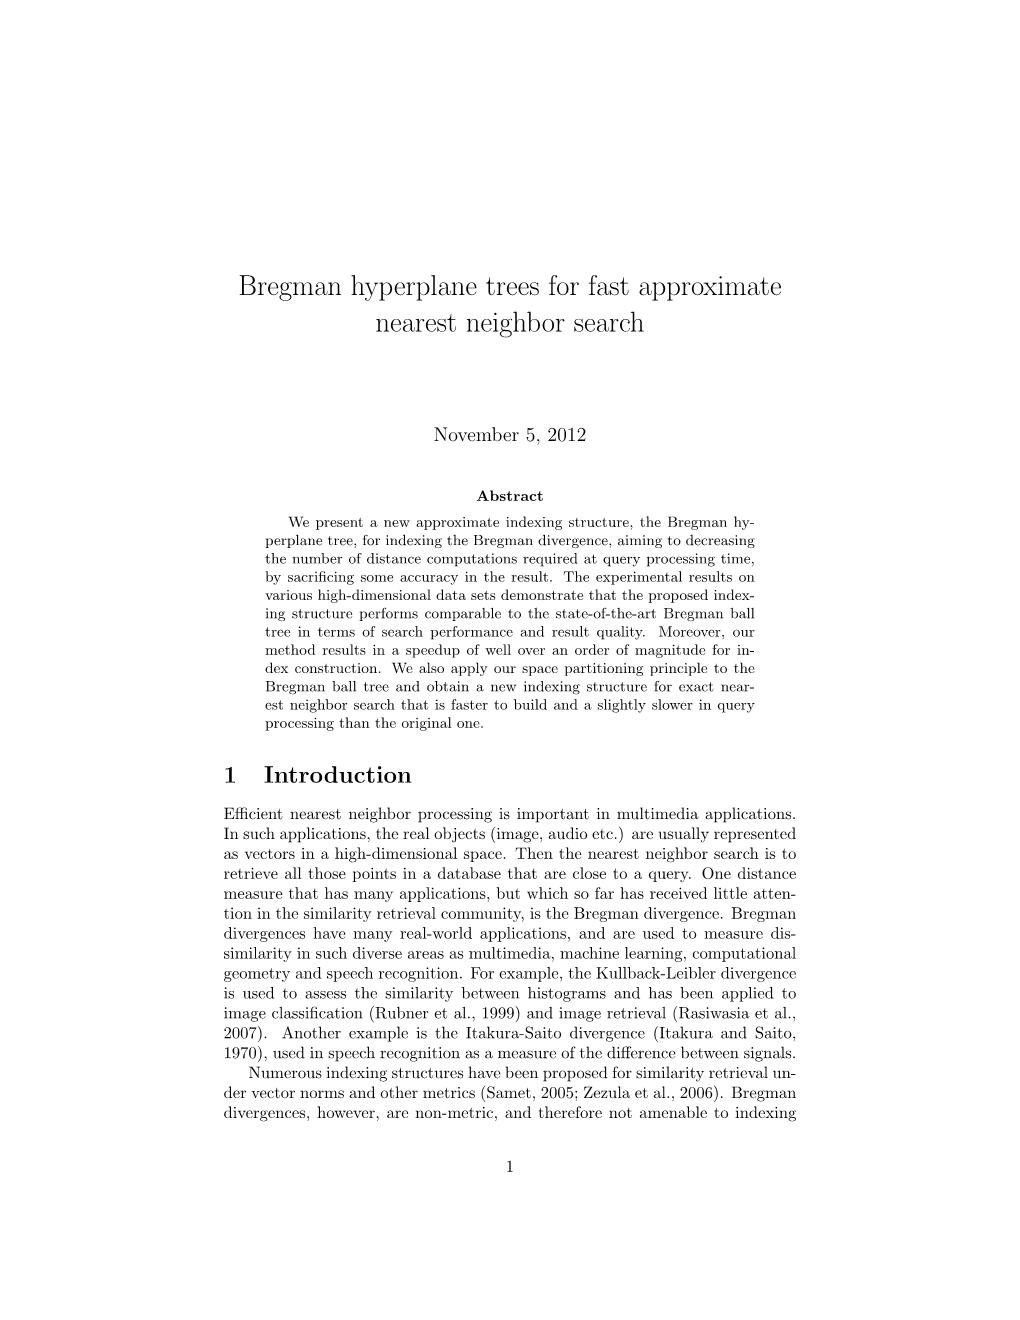 Bregman Hyperplane Trees for Fast Approximate Nearest Neighbor Search